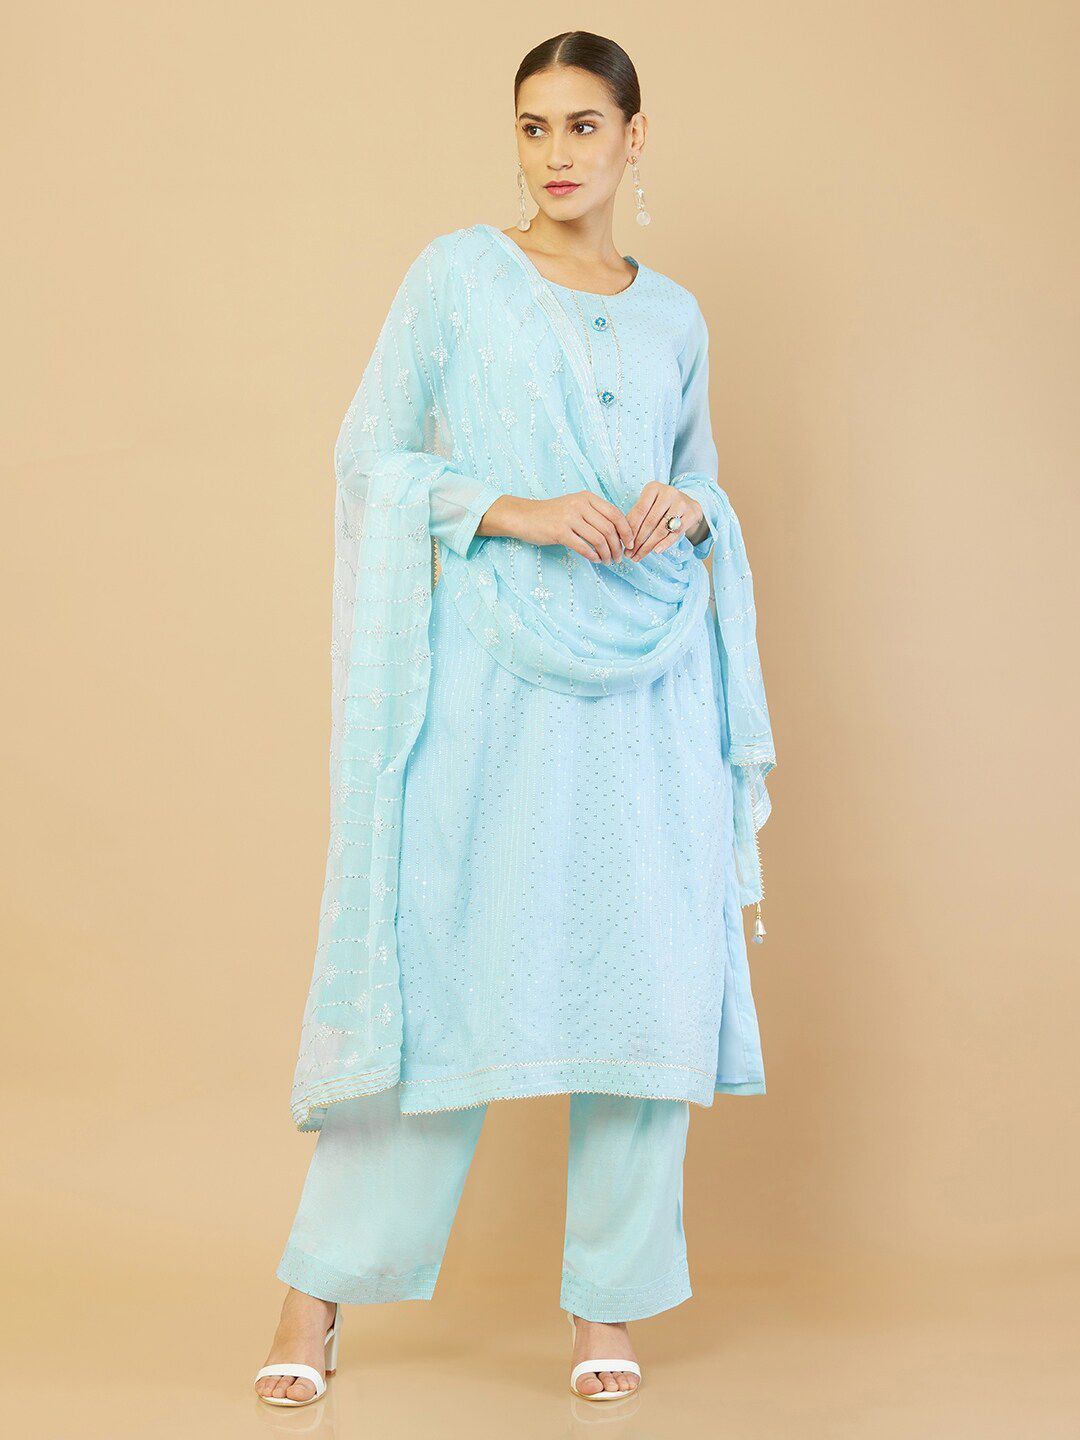 Soch Blue Embroidered Jute Silk Unstitched Dress Material Price in India